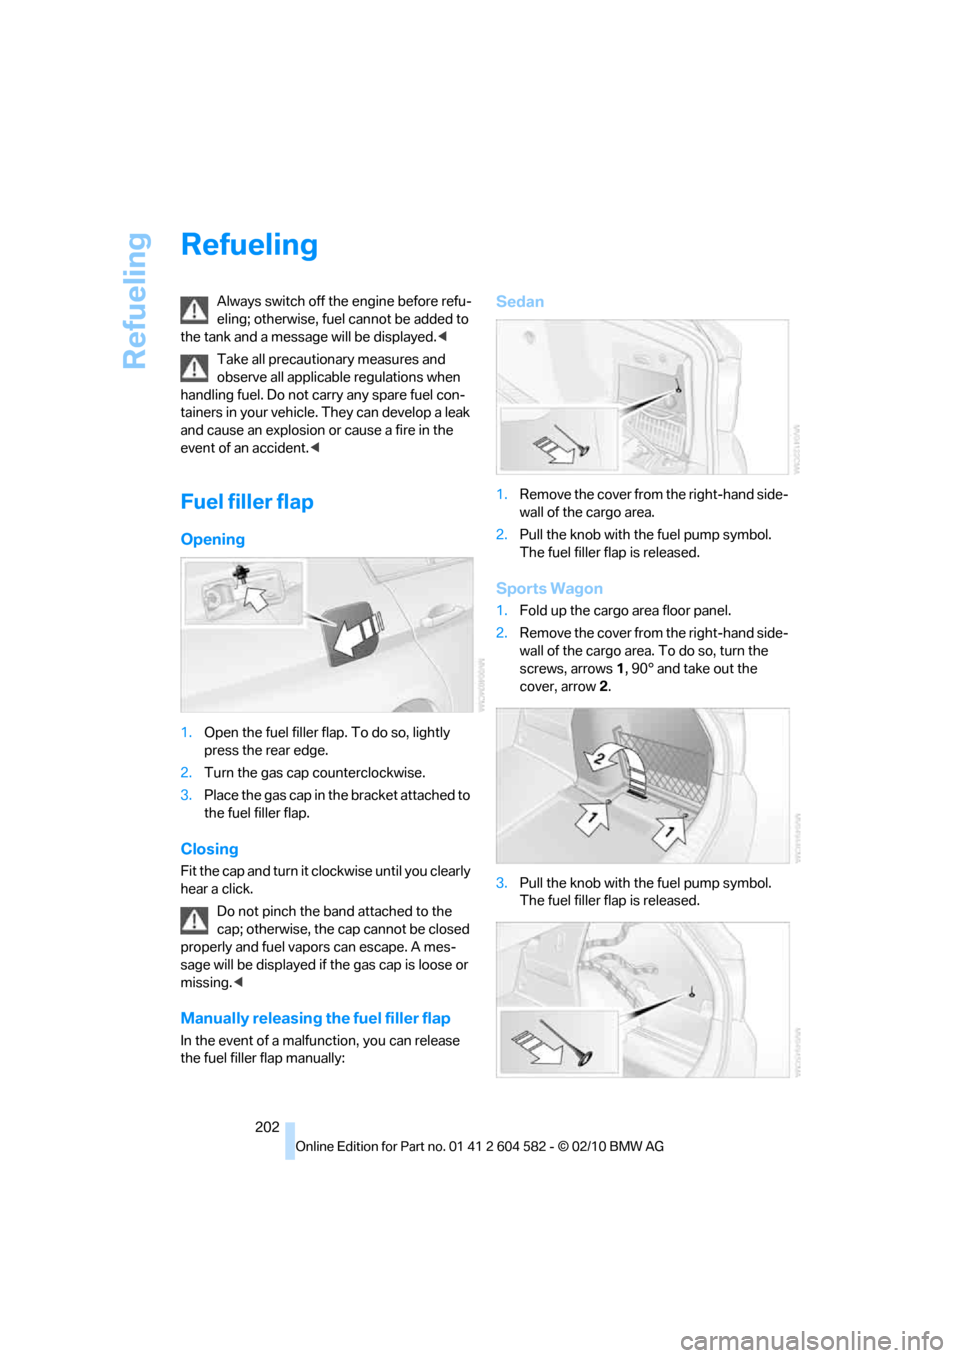 BMW 335I 2011 E90 Owners Manual Refueling
202
Refueling
Always switch off the engine before refu-
eling; otherwise, fuel cannot be added to 
the tank and a message will be displayed.<
Take all precautionary measures and 
observe all